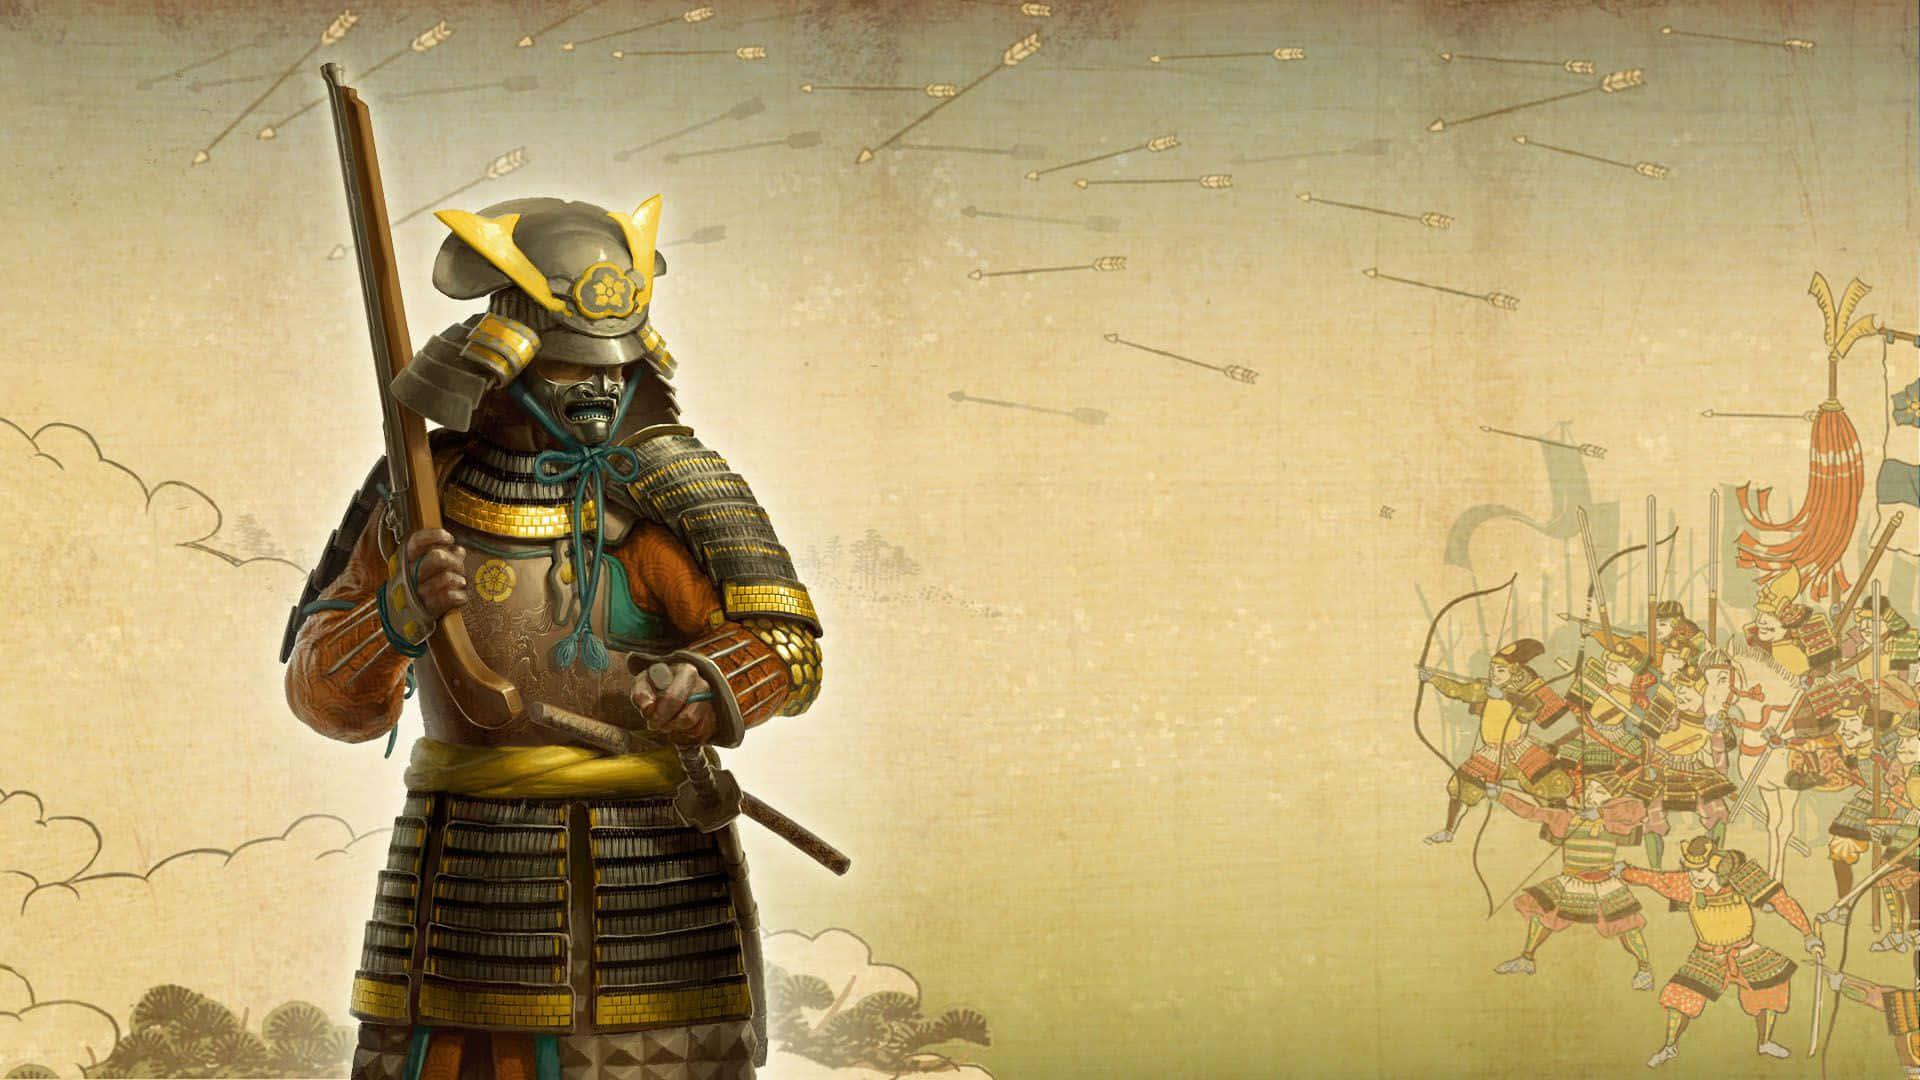 Challenge yourself to become the greatest Shogun in Total War Shogun 2